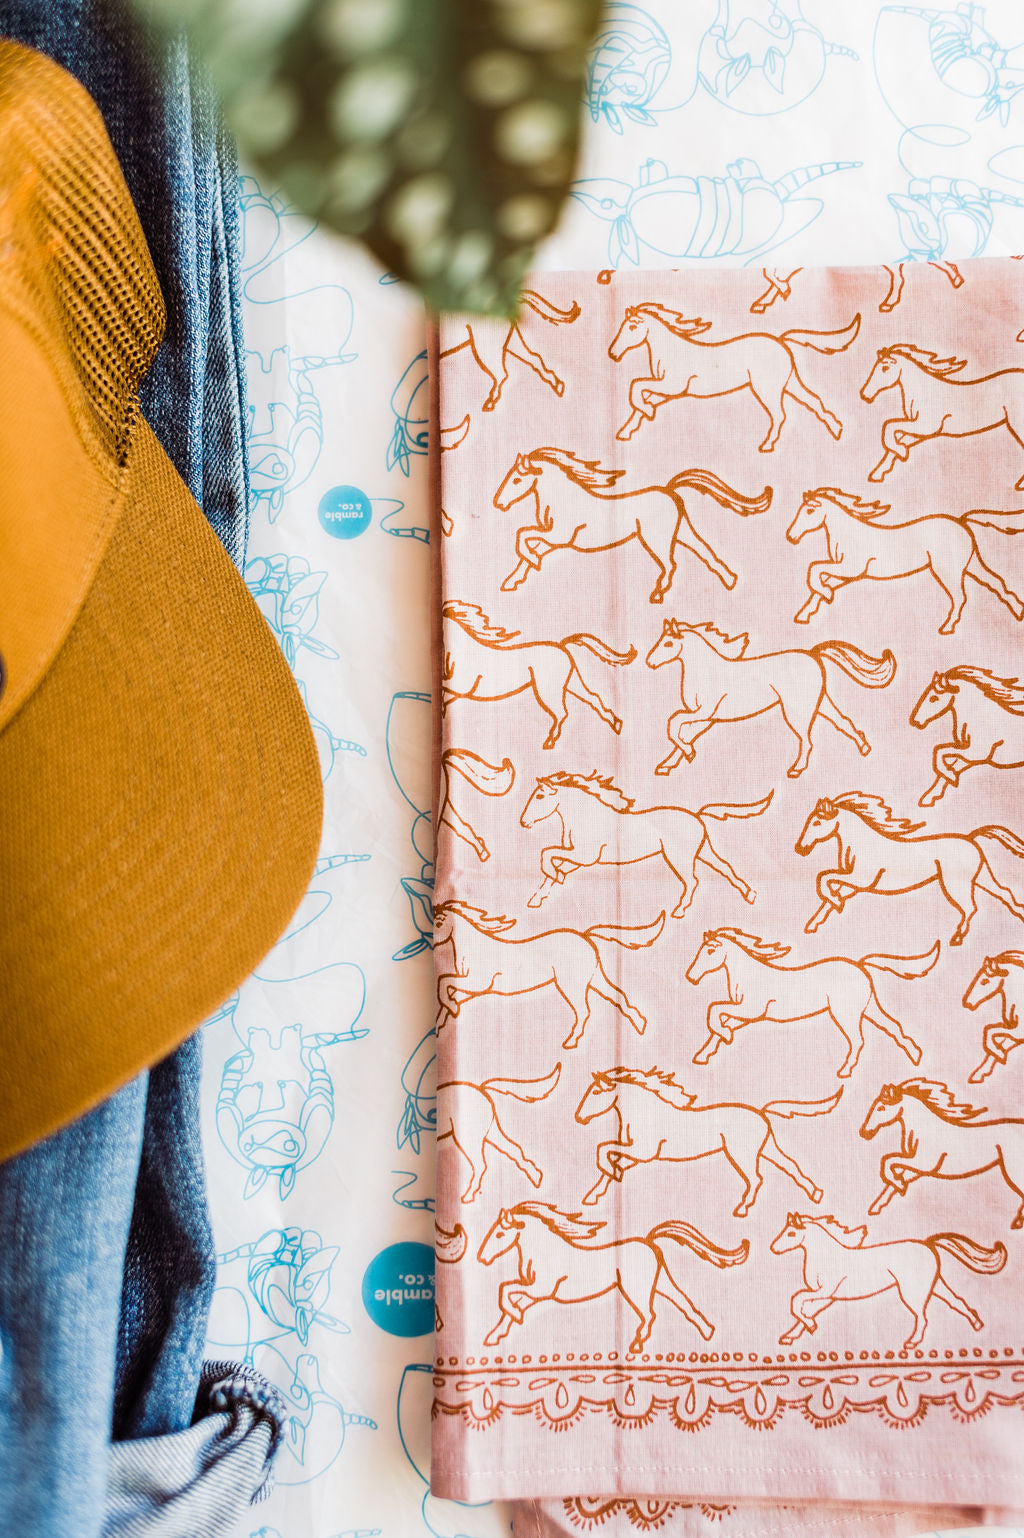 Pink bandana with brown outlined horses design by Hemlock Goods | you can shop now at  shop.rambleandcompany.com or visit our storefront in downtown Wichita Falls, Texas || small batch + hand printed tees | home goods | paper goods | gifts + more